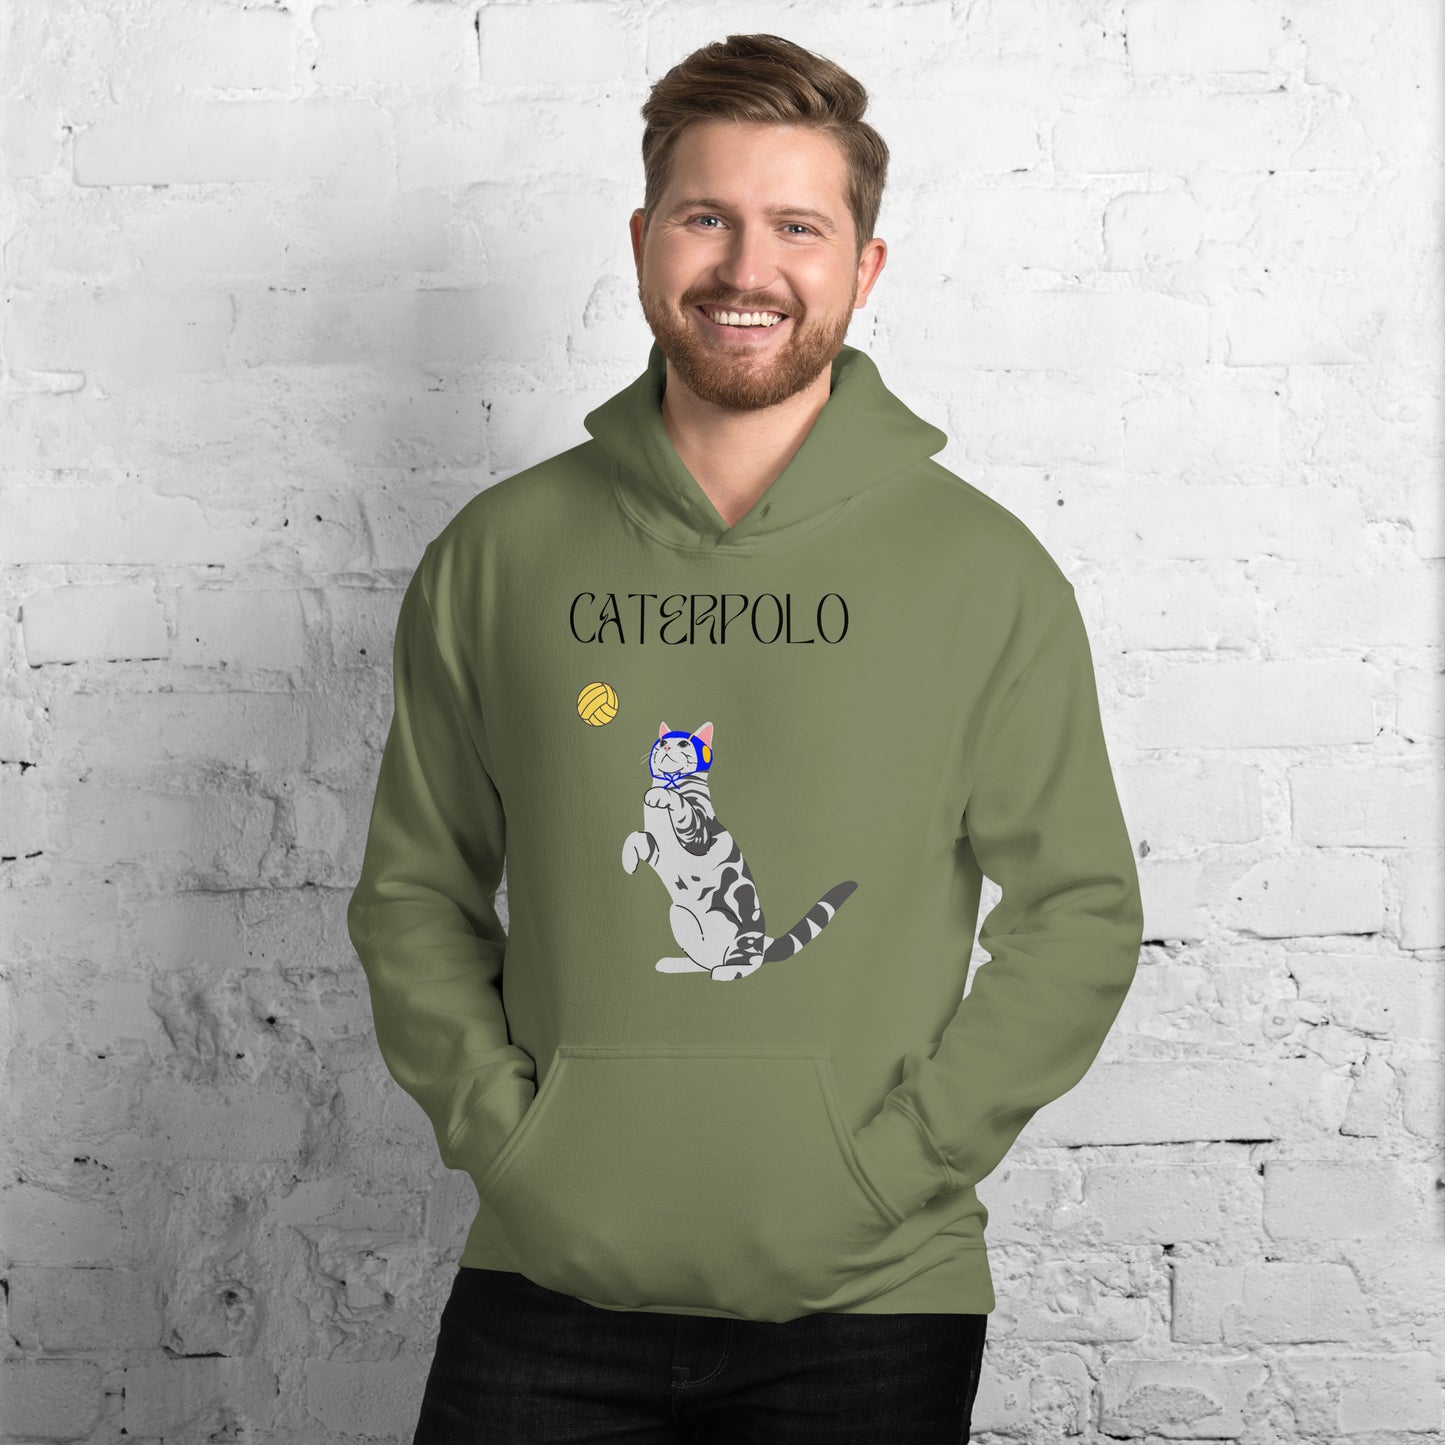 Caterpolo, if cats played waterpolo  - Unisex Heavy Blend Hoodie - Gildan 18500